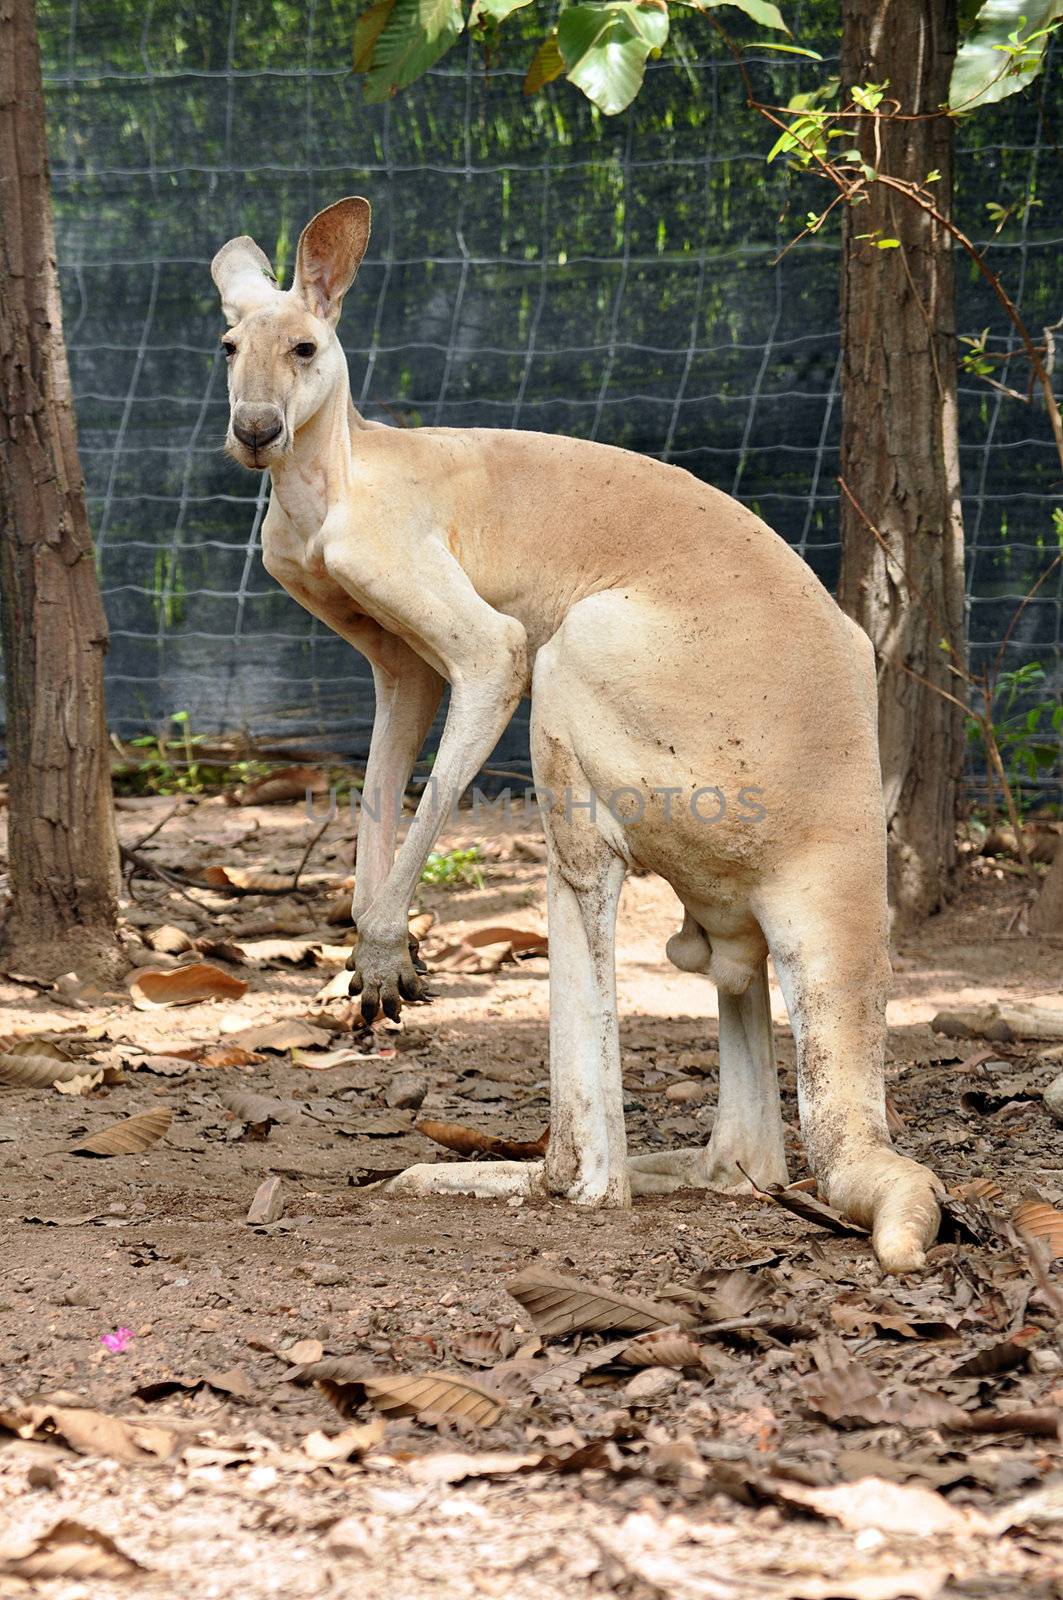 Larger kangaroos have adapted much better to changes brought to the Australian landscape by humans and though many of their smaller cousins are endangered, they are plentiful.